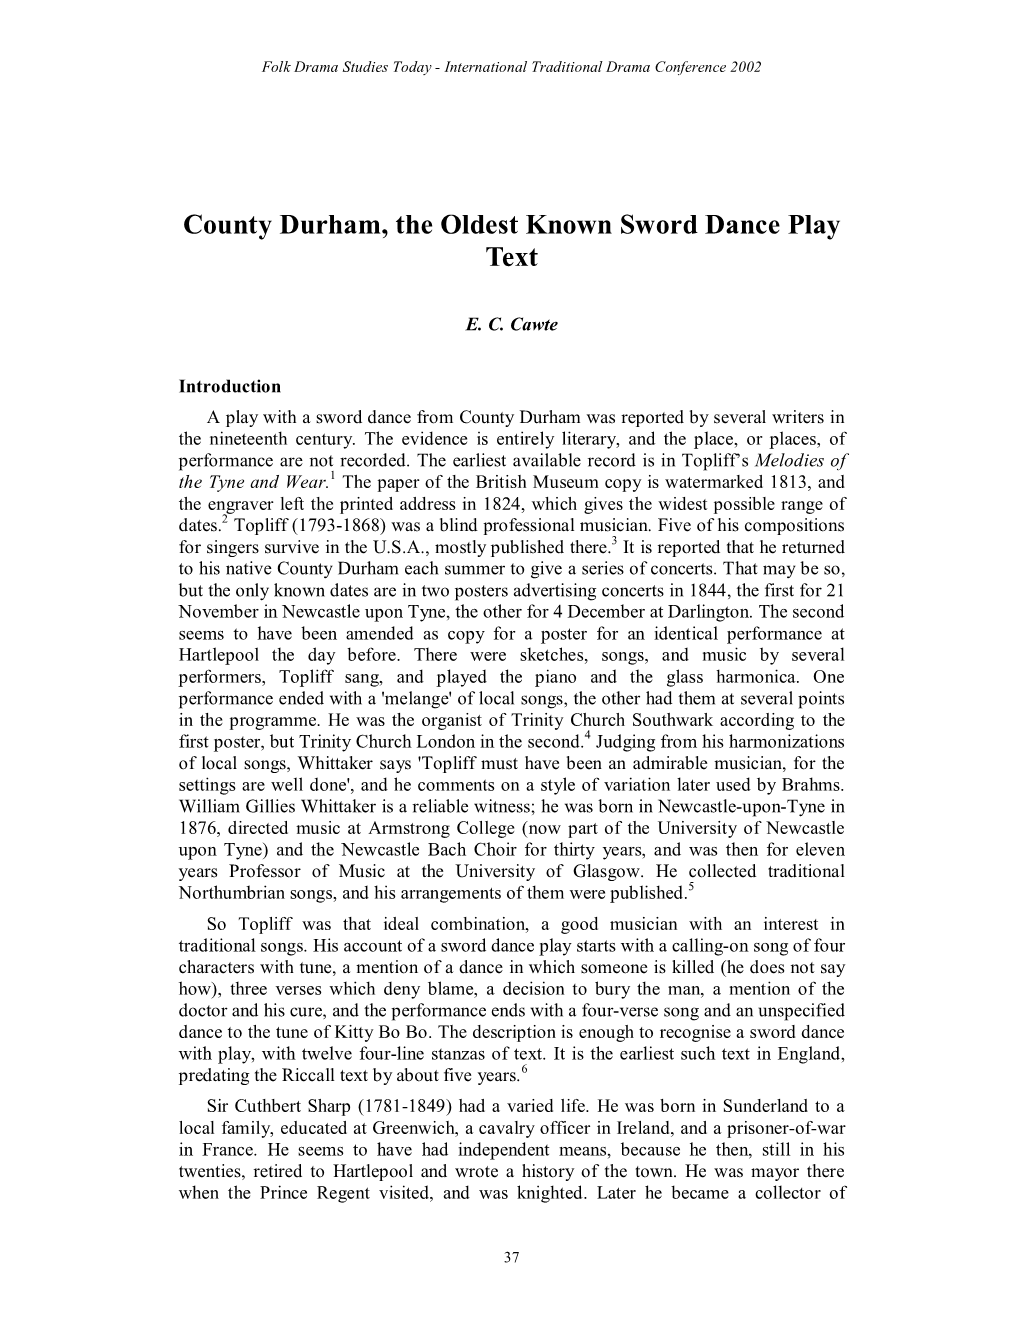 County Durham, the Oldest Known Sword Dance Play Text